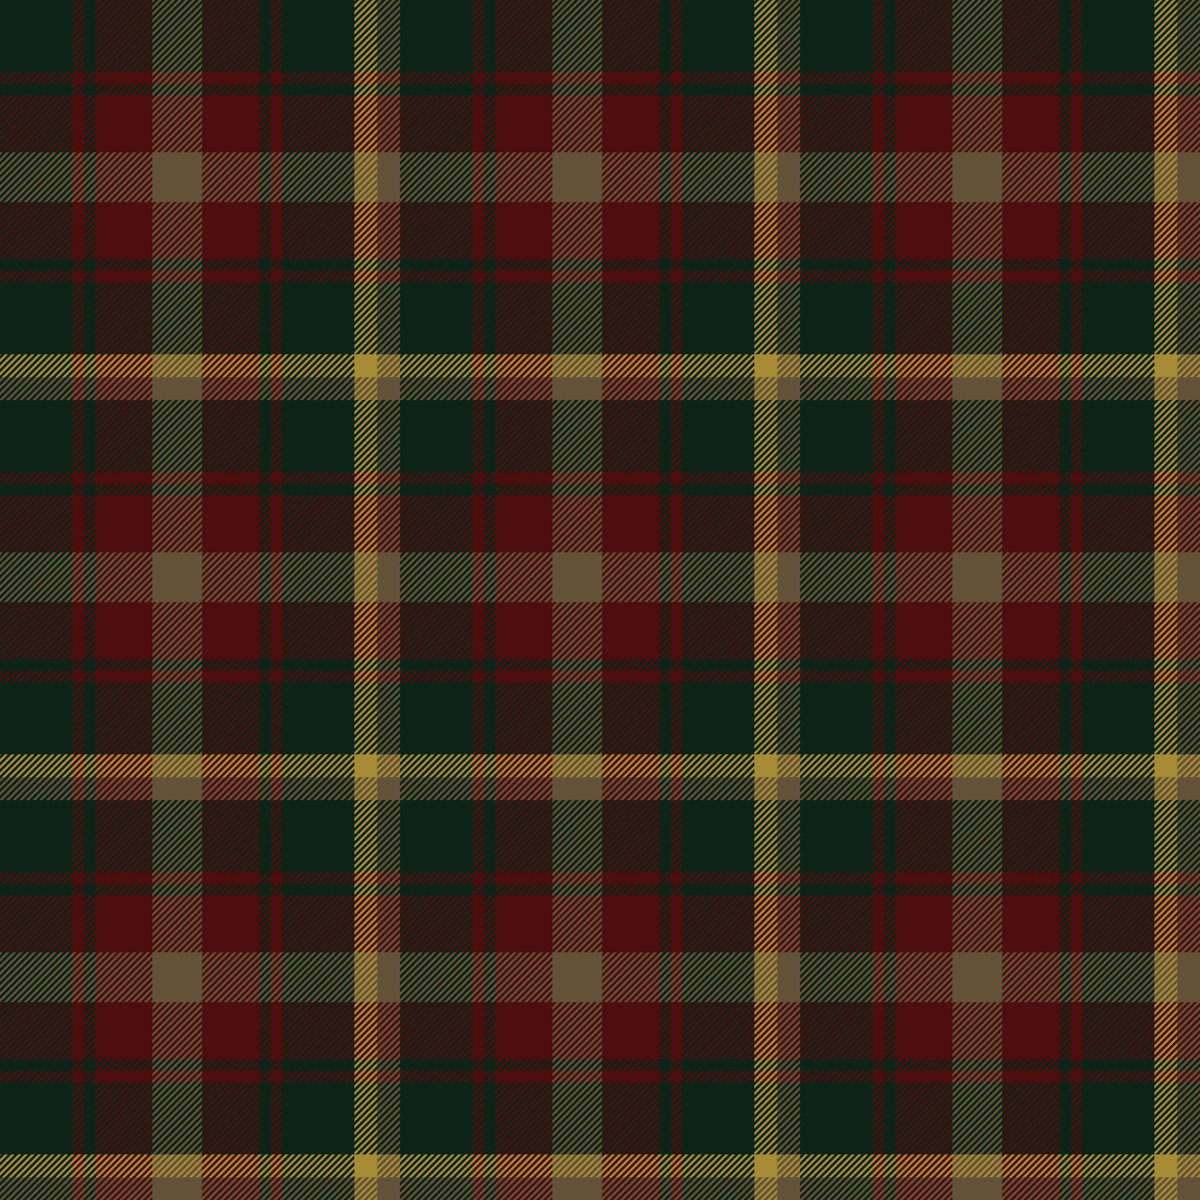 #NationalTartanDay celebrates the heritage of Scottish Canadians and the signing of the Scottish declaration of independence. Most provinces and territories have a distinct #tartan, with colours chosen to represent each region. Did you know #Canada has an official tartan? 🏴󠁧󠁢󠁳󠁣󠁴󠁿🇨🇦